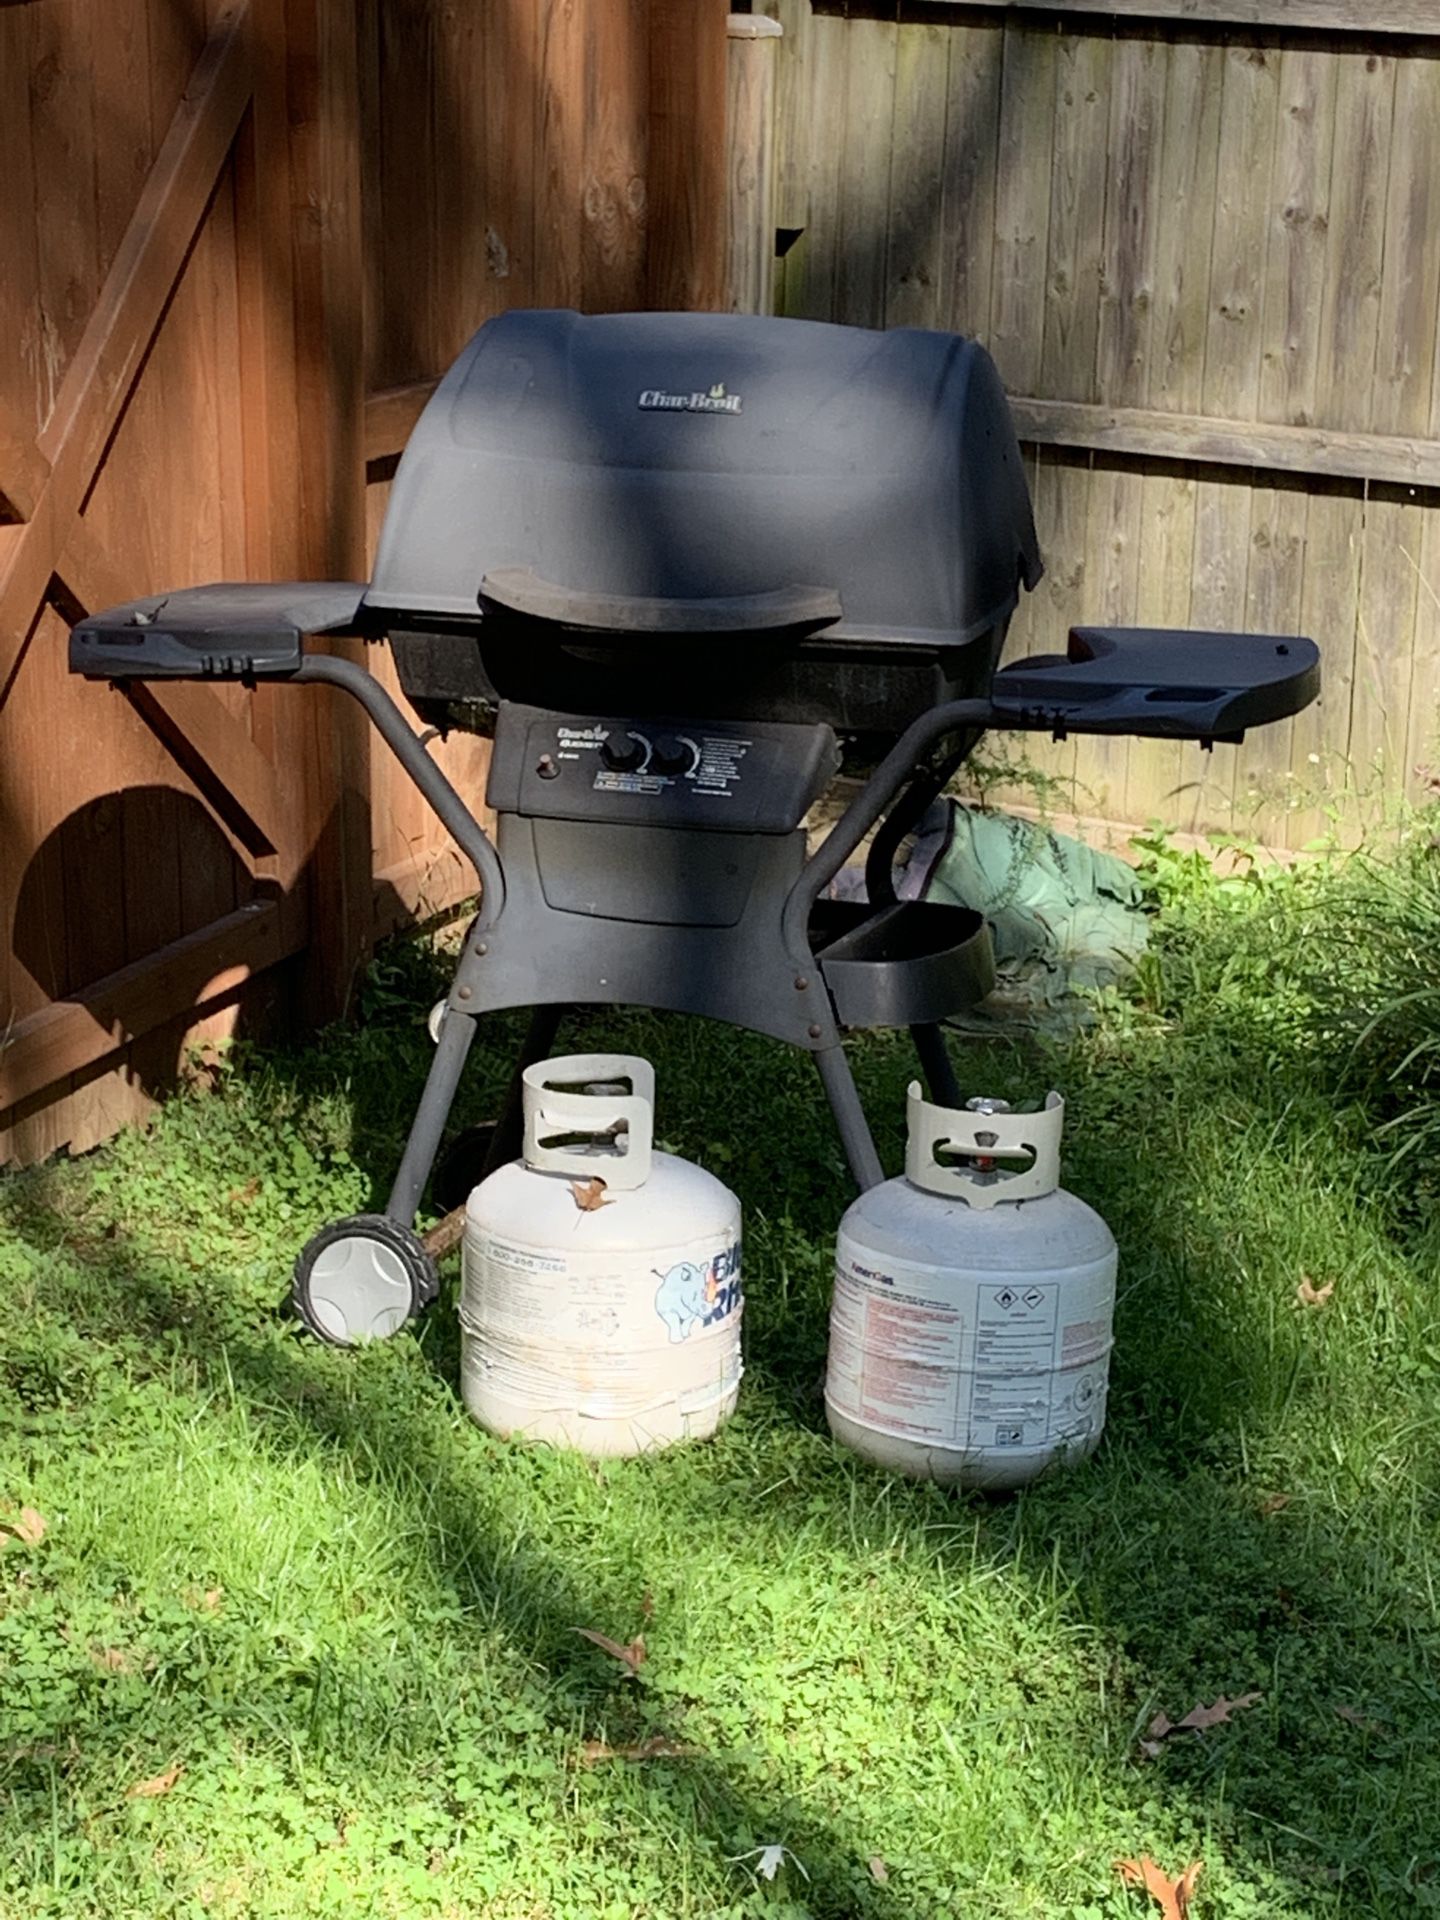 Grill and propane tanks